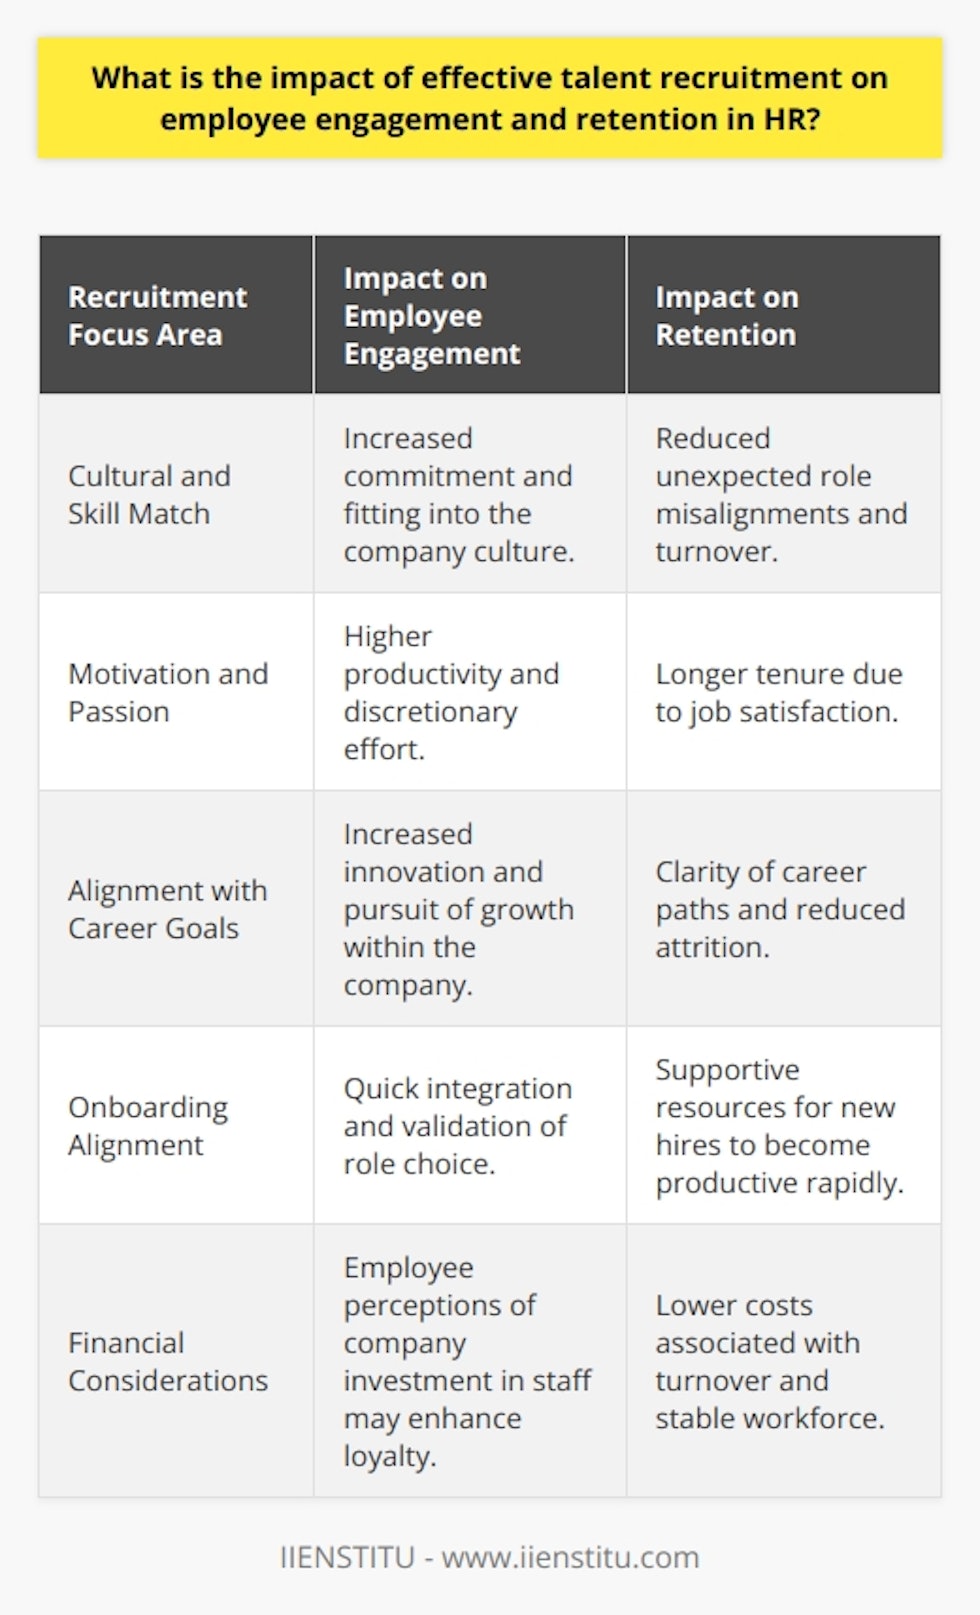 Effective talent recruitment is vital to building a workforce that is both highly engaged and likely to stay with an organization for the long term. Recruitment is far more than just filling vacancies; it's about finding the right individuals whose skills, values, and career goals match the needs and culture of the company. This synergistic match can have a profound impact on both employee engagement and retention.Enhancing Employee Engagement through Strategic RecruitmentEmployee engagement is significantly influenced by how well an employee feels their talents are utilized and valued within an organization. Effective talent recruitment processes identify candidates who not only have the required skill set but are also likely to be passionate and motivated by the role they are filling. With a focus on cultural fit and future potential, HR departments can ensure that new employees are more likely to be committed and contribute positively from the beginning.Engaged employees tend to be more productive, put in greater discretionary effort, and are more committed to the organization’s goals – all of which can be traced back to the effectiveness of the recruitment process. In addition, employees who feel that their role aligns with their personal career trajectory are more likely to be innovative and pursue growth opportunities within the company.Boosting Retention through Effective Hiring PracticesEffective talent recruitment is essential for employee retention as it sets the tone for the employee's tenure at the company. When candidates are properly assessed for fit and potential, they are more likely to stay with a company longer. This is because these employees are less likely to encounter unexpected challenges and misalignments regarding their role's responsibilities and the company's environment.Retention is further improved when the onboarding process is a continuation of the recruitment journey, reinforcing the employee's decision to join the company and providing them with the resources they need to quickly become a productive member of the team. HR departments must ensure that recruitment strategies encompass a comprehensive understanding of what makes an employee stay and reduce the chances of attrition due to dissatisfying work environments or unclear career paths.The Fiscal Impact of Recruitment on RetentionBeyond the psychological and cultural implications, effective talent recruitment has financial ramifications on retention. High employee turnover is costly, with expenses stemming from severance packages, recruitment costs for replacement hires, and the potential disruption to team dynamics and productivity. Investing in quality recruitment processes not only reduces these costs but also contributes to a stable and reliable workforce.In conclusion, the strategic integration of recruitment practices within HR has direct and influential effects on employee engagement and retention. Recruitment, when executed effectively, recognizes the human capital as the cornerstone of organizational success. By attracting and hiring individuals who are both capable and culturally aligned with a company, HR departments can drive engagement and create a workforce that is resilient, dedicated, and less likely to seek opportunities elsewhere. This strategic approach not only fosters a positive work environment but also undergirds the organization's competitive edge in the marketplace.